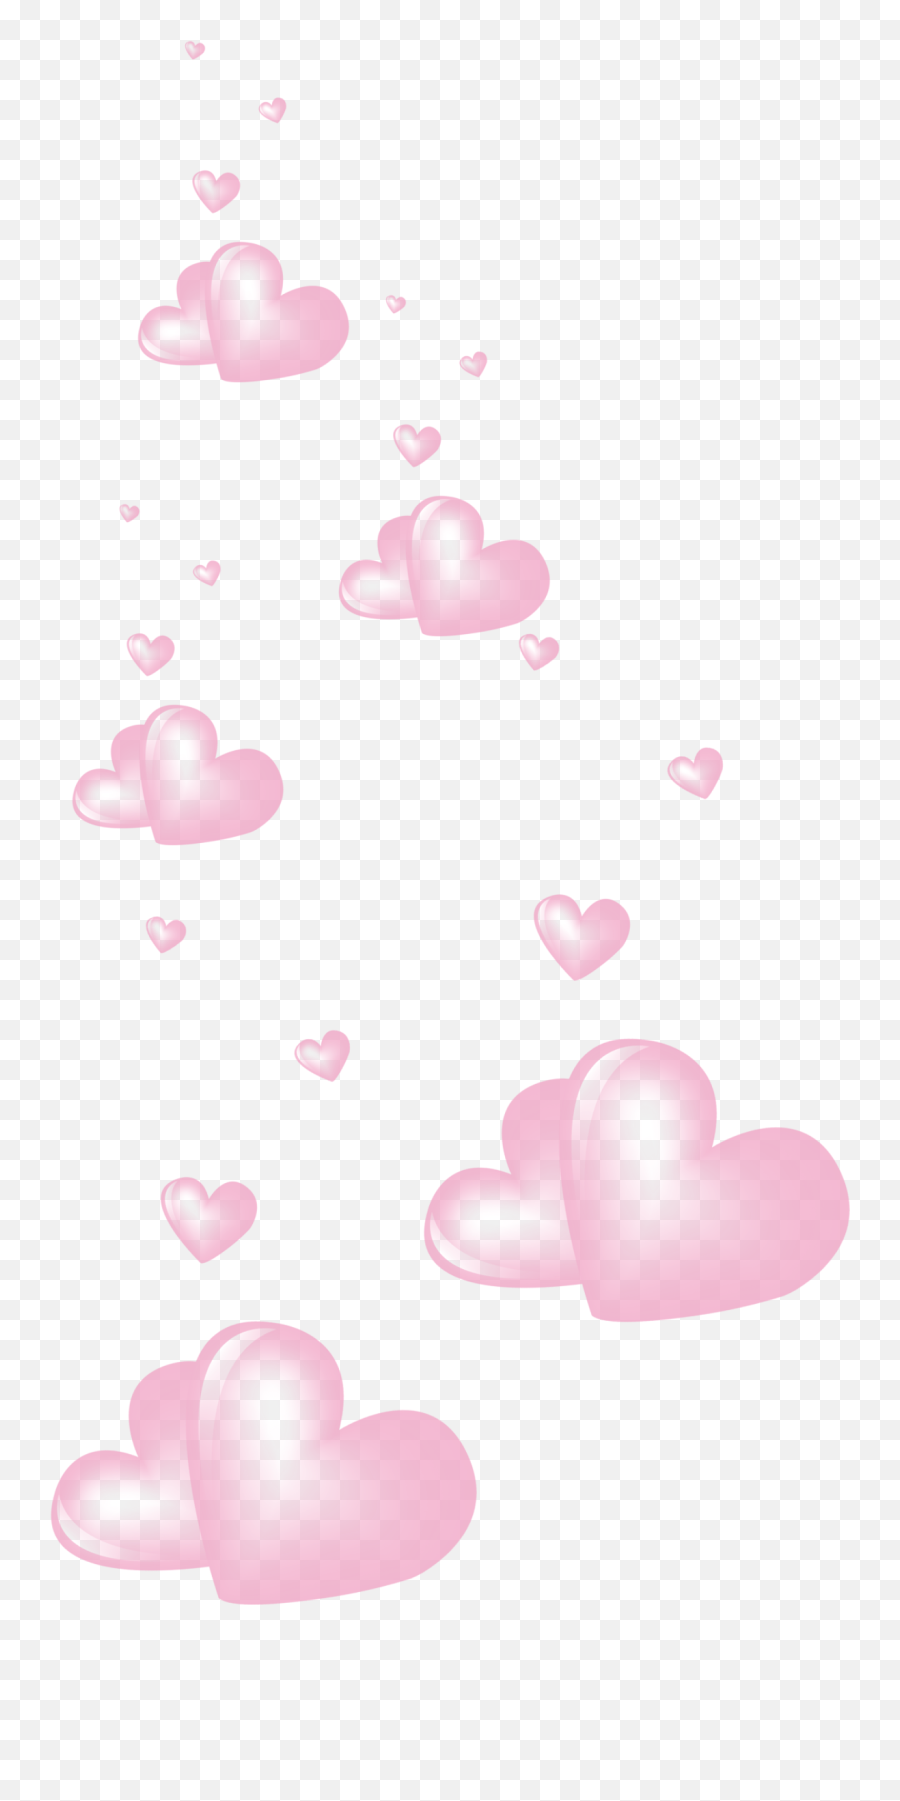 Pink Hearts Heart Love Floating - Floating Pink Hearts Clipart Emoji,Floating Hearts Emoji